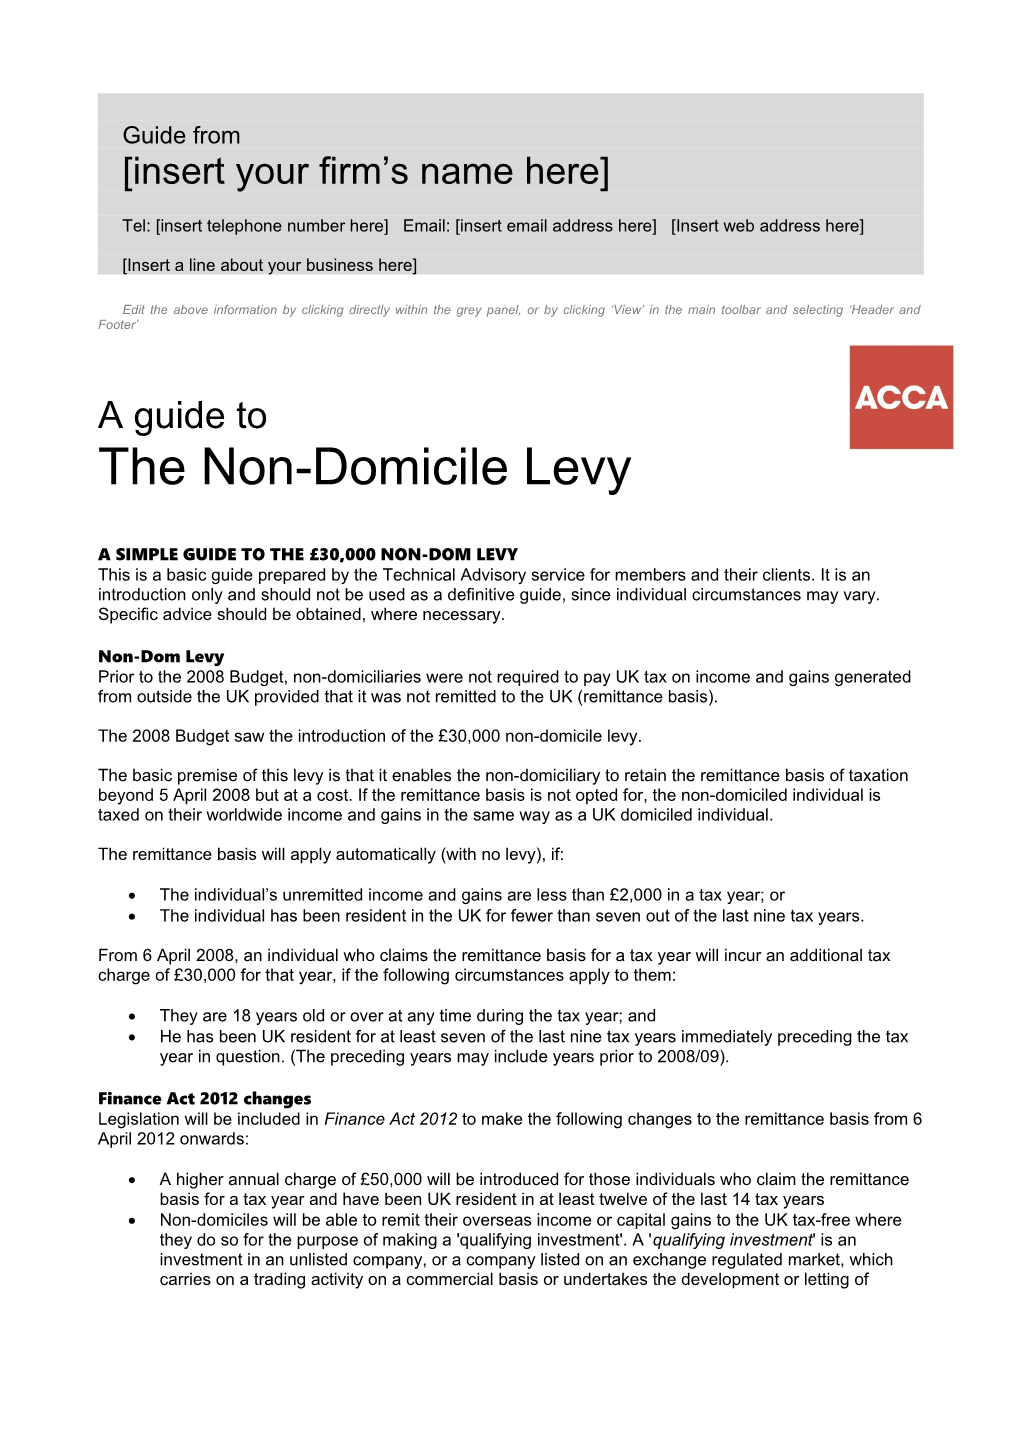 A Simple Guide to the 30,000 Non-Dom Levy